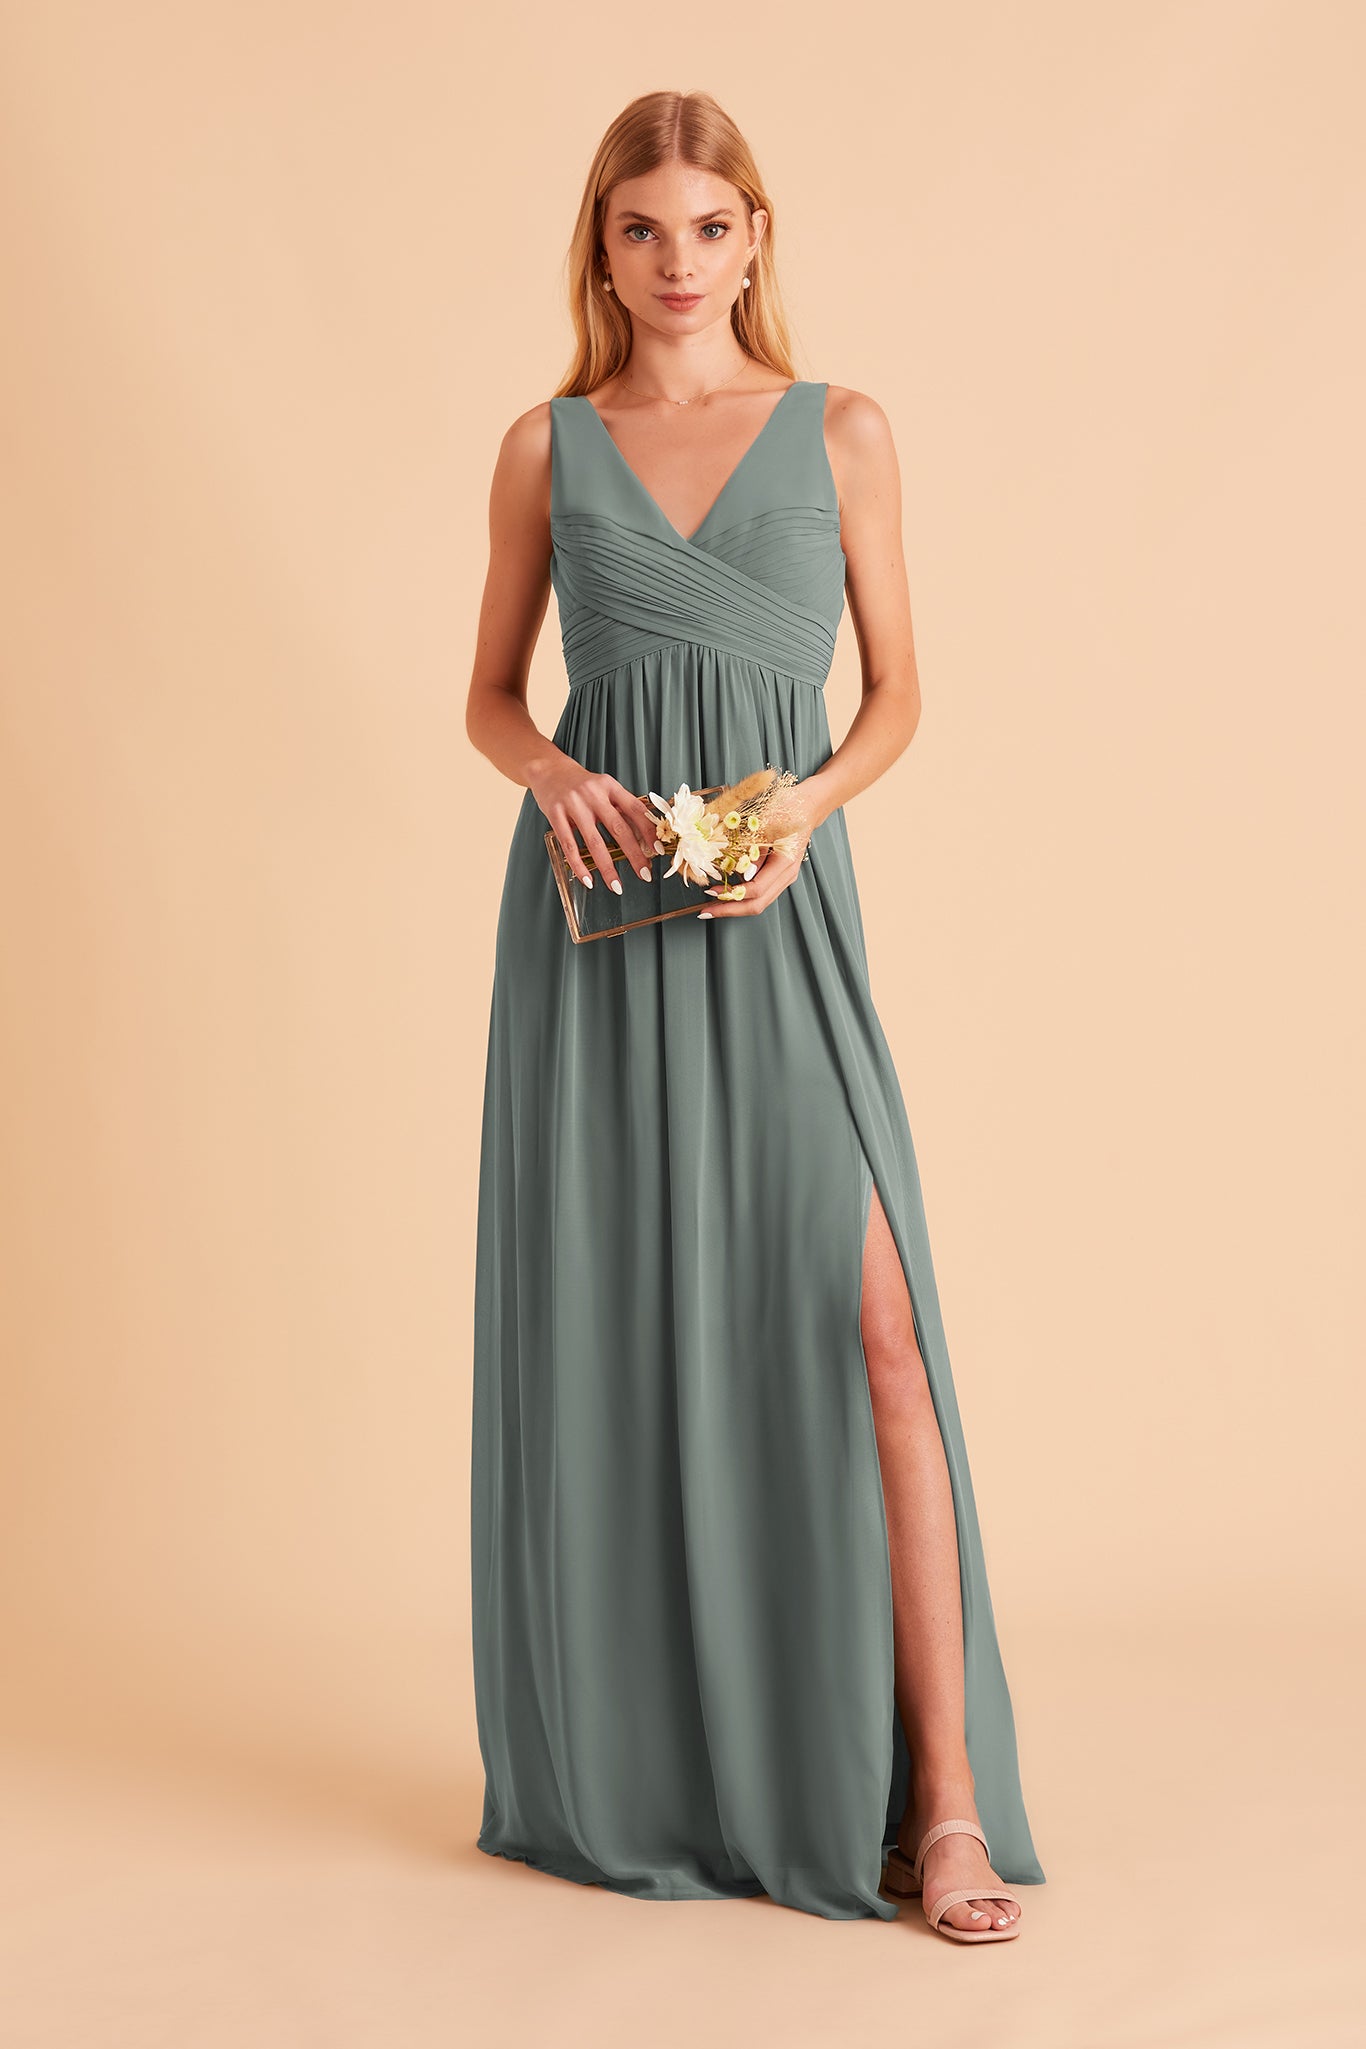 Laurie Empire bridesmaid dress with slit in sea glass chiffon by Birdy Grey, front view